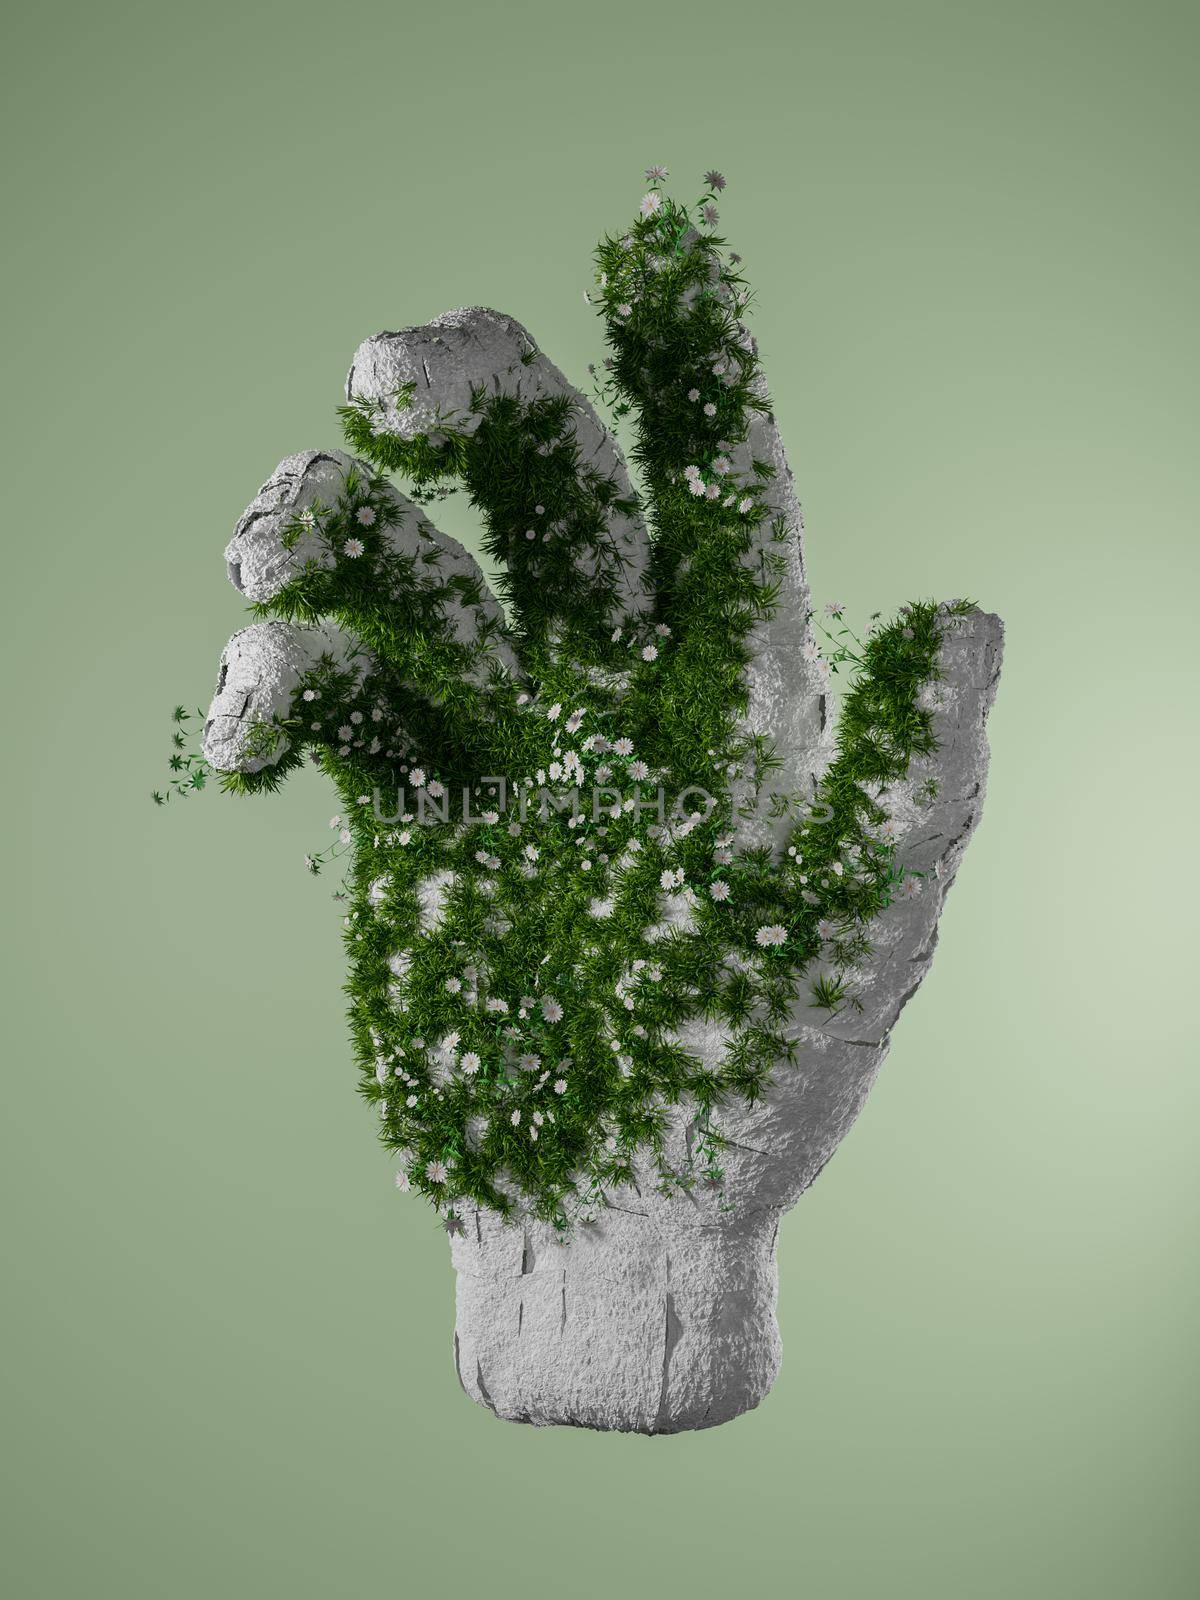 cracked white hand with vegetation and flowers growing out of it on a green background